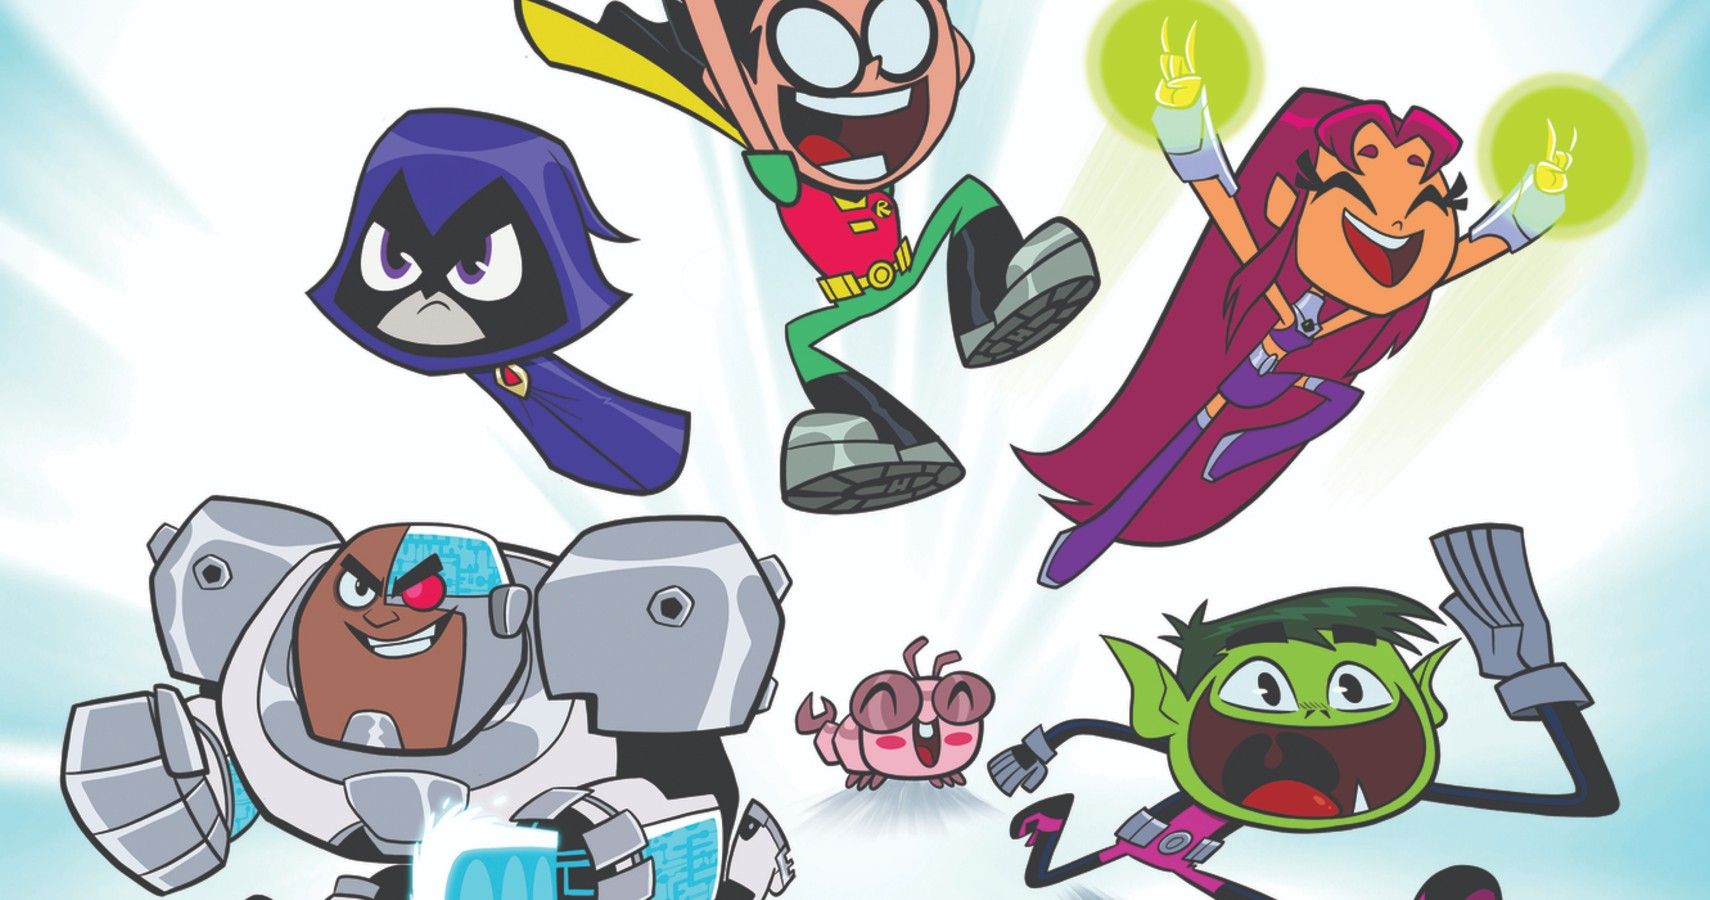 Teen Titans: How the Pop Duo Behind the Iconic Theme Got Their Own Cartoon